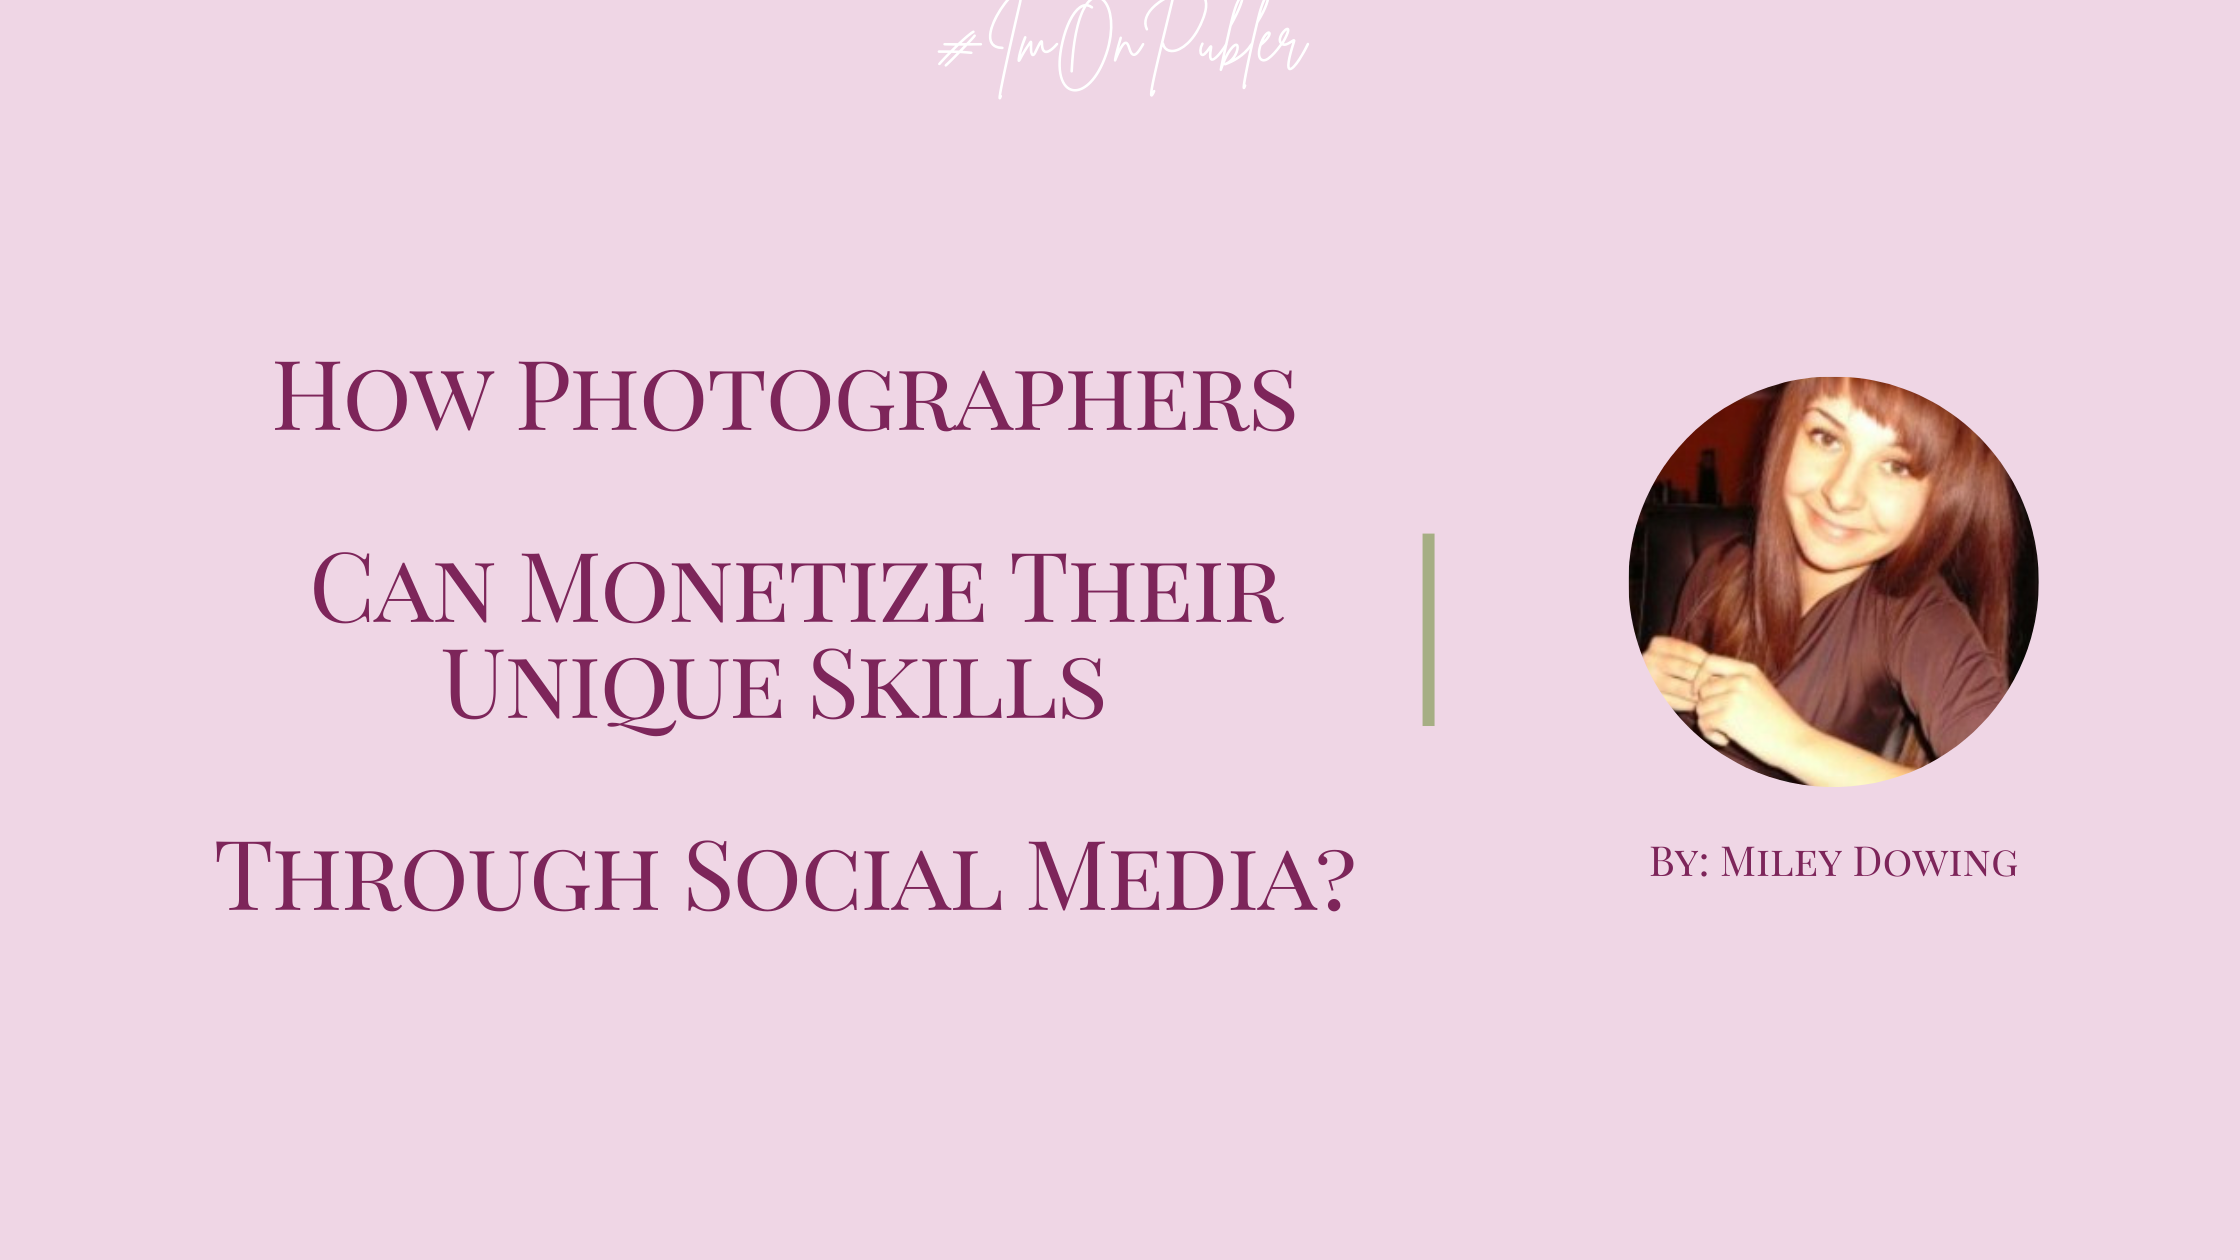 How Photographers Can Monetize Their Unique Skills Through Social Media? by Miley Dowing